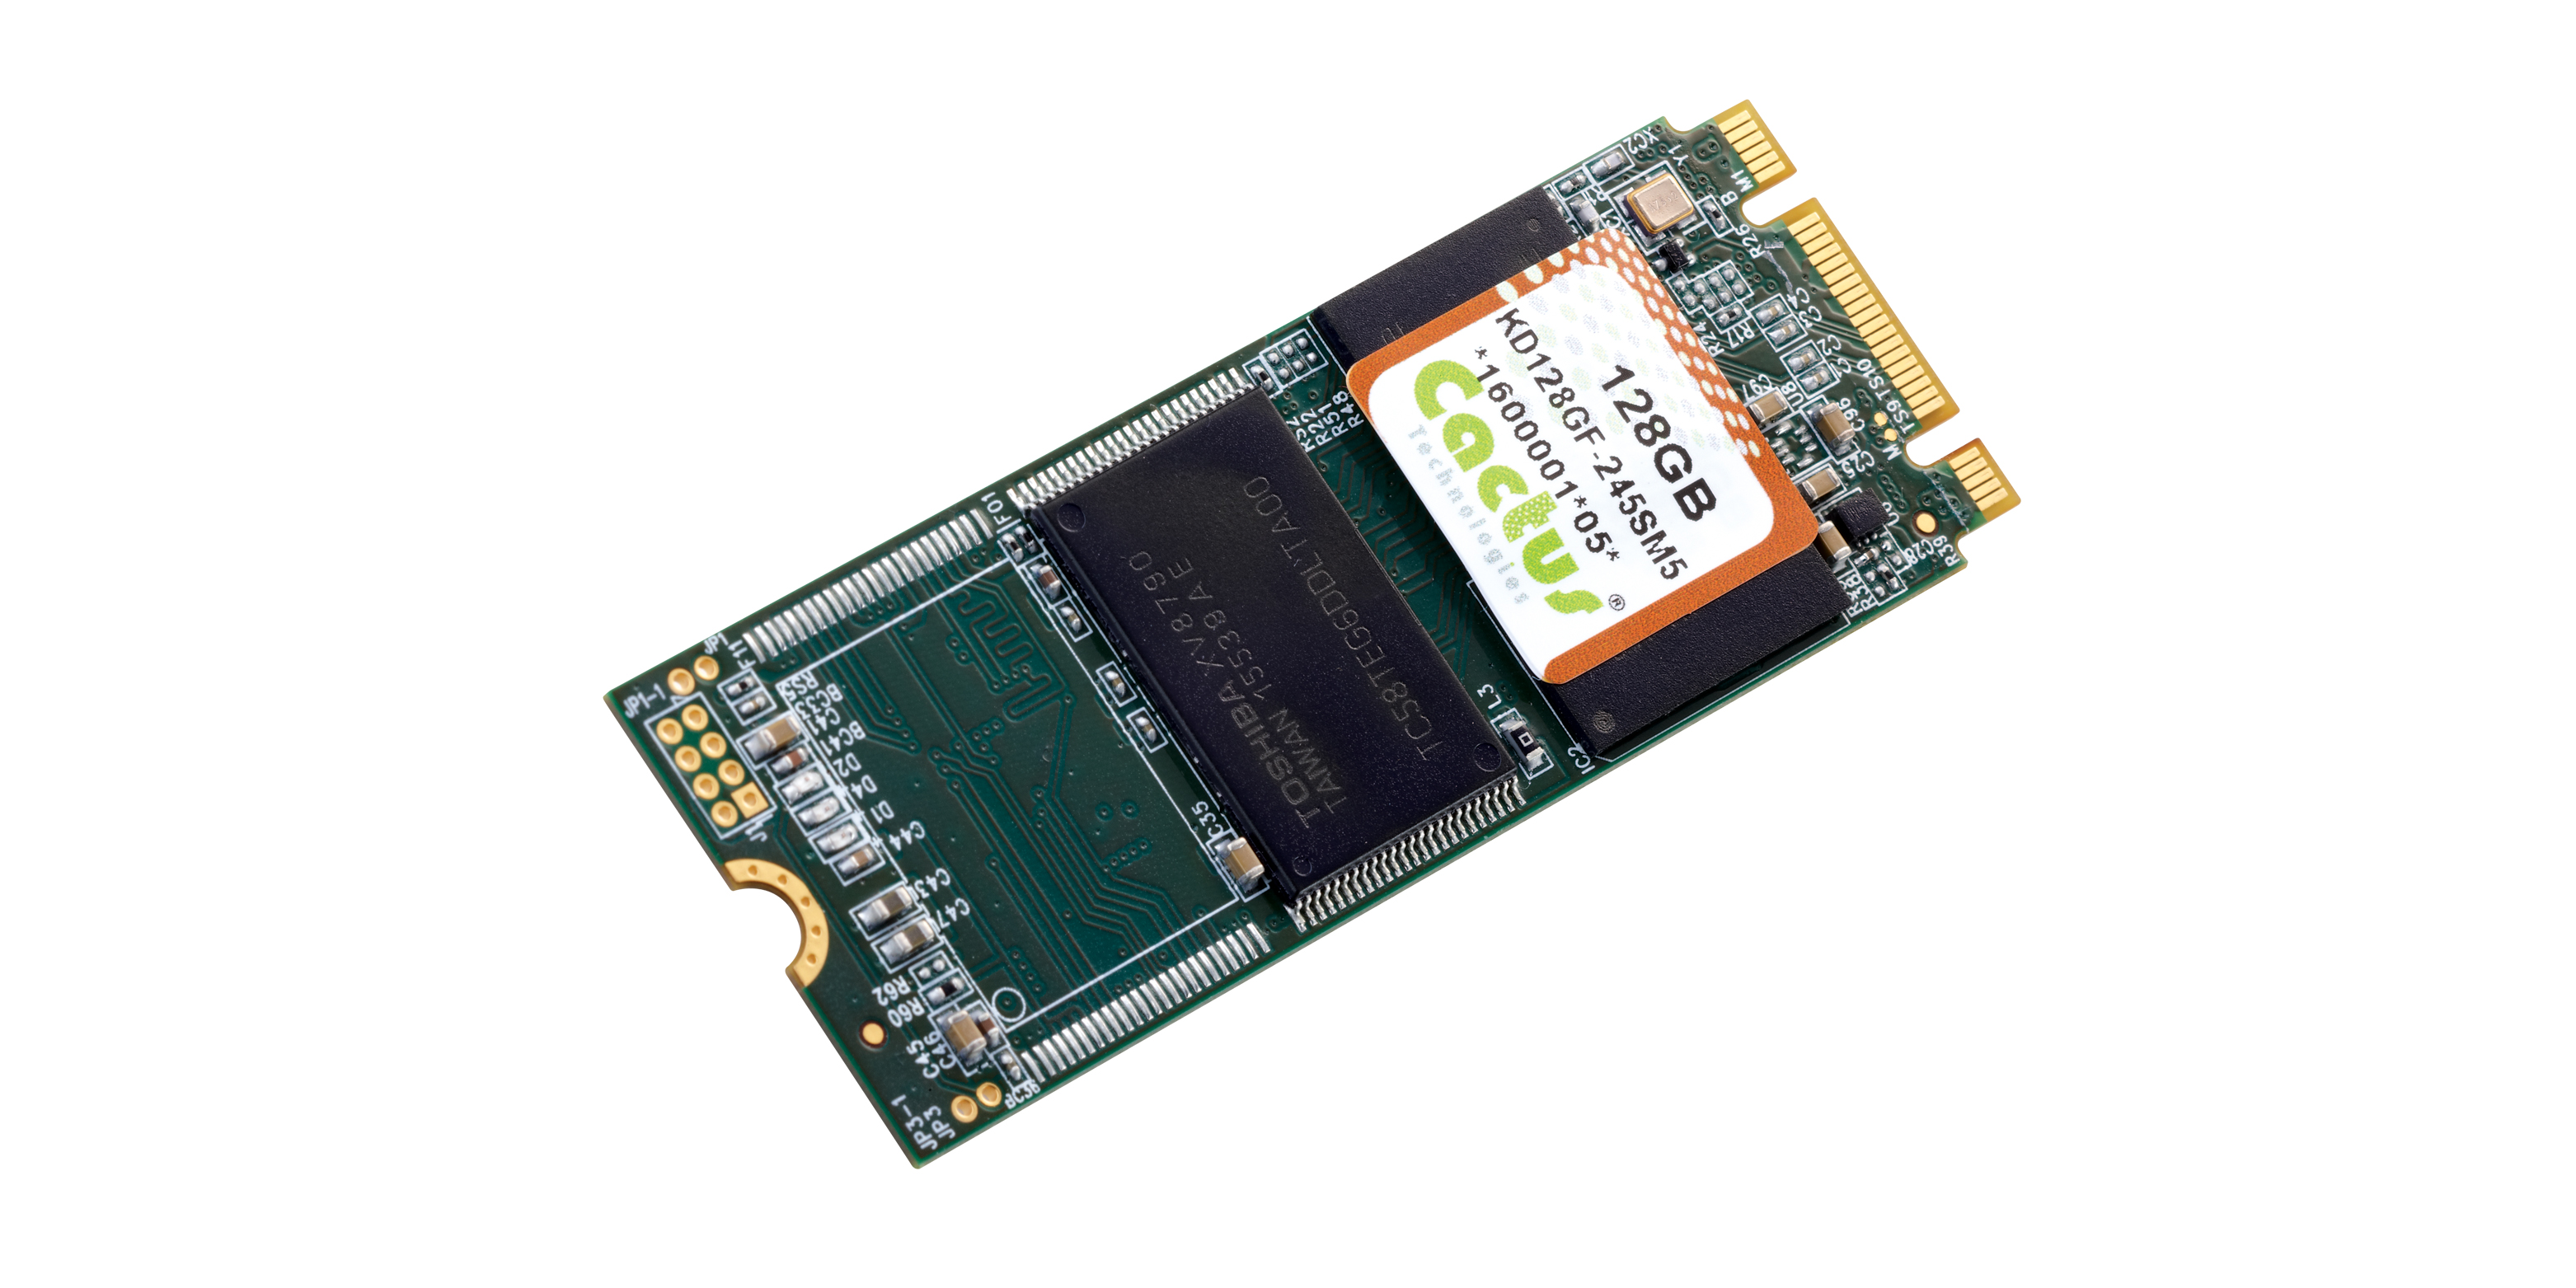 pSLC (Pseudo Single Level Cell) M.2 2260 SSD – Cactus Technologies 245S Series